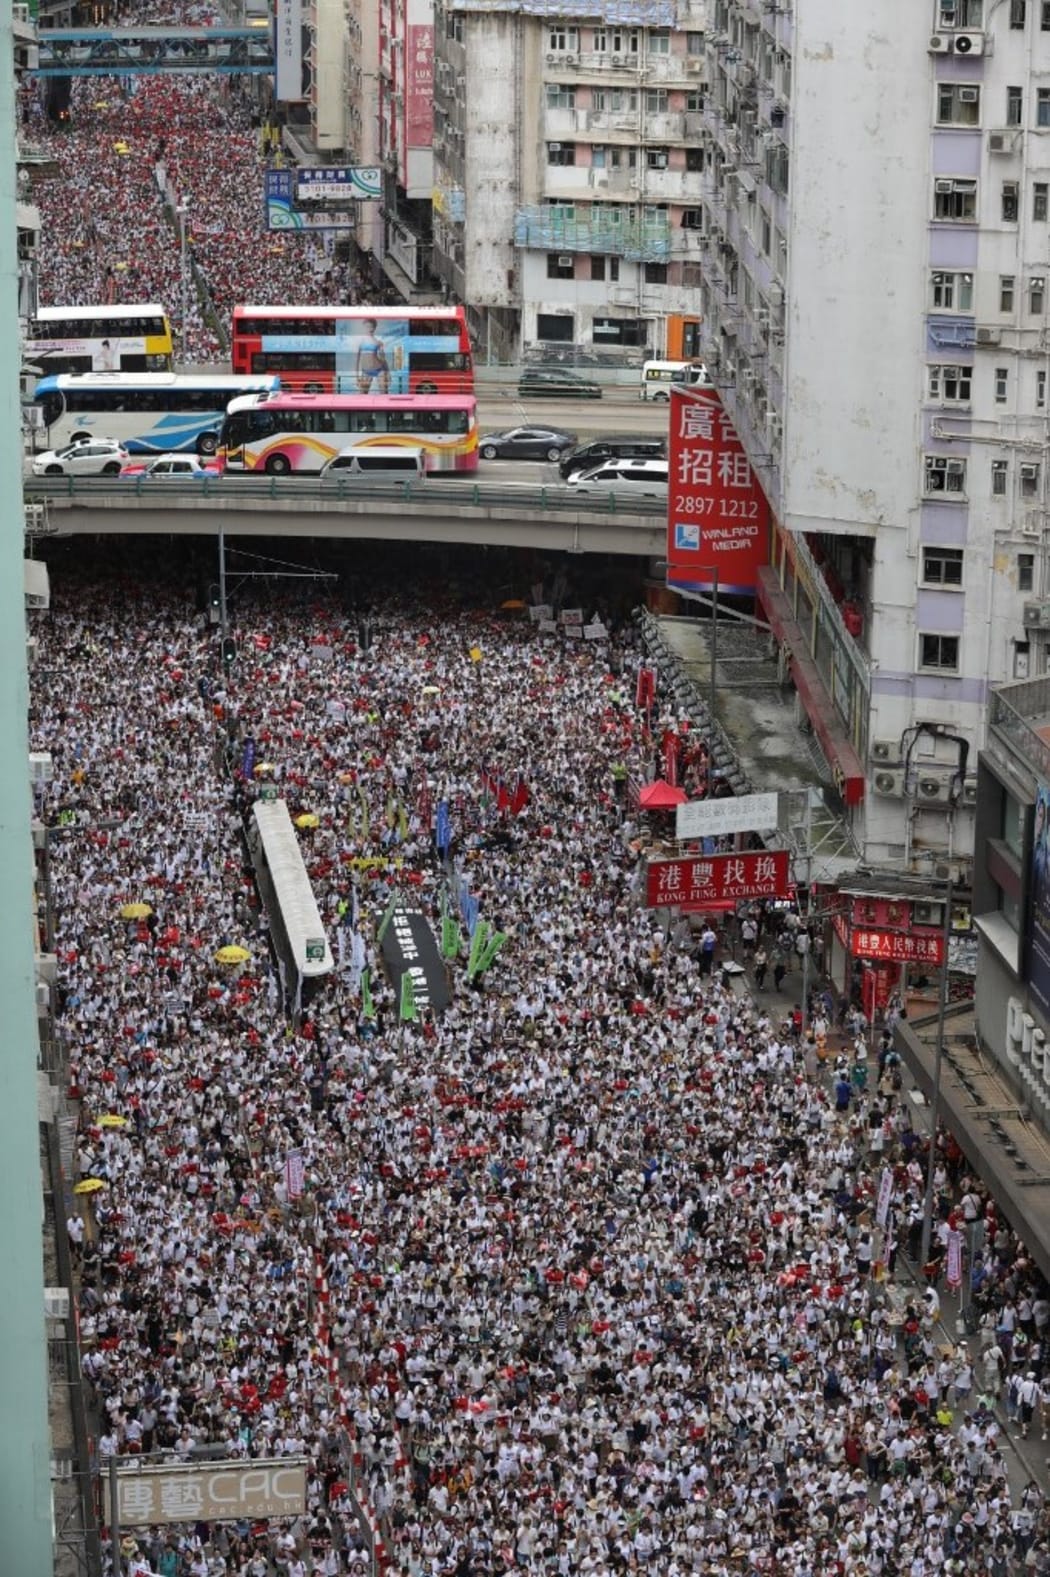 More than one million people took the streets in Hong Kong to protest the controversial extradition law. Could AI help count the crowds more accurately?